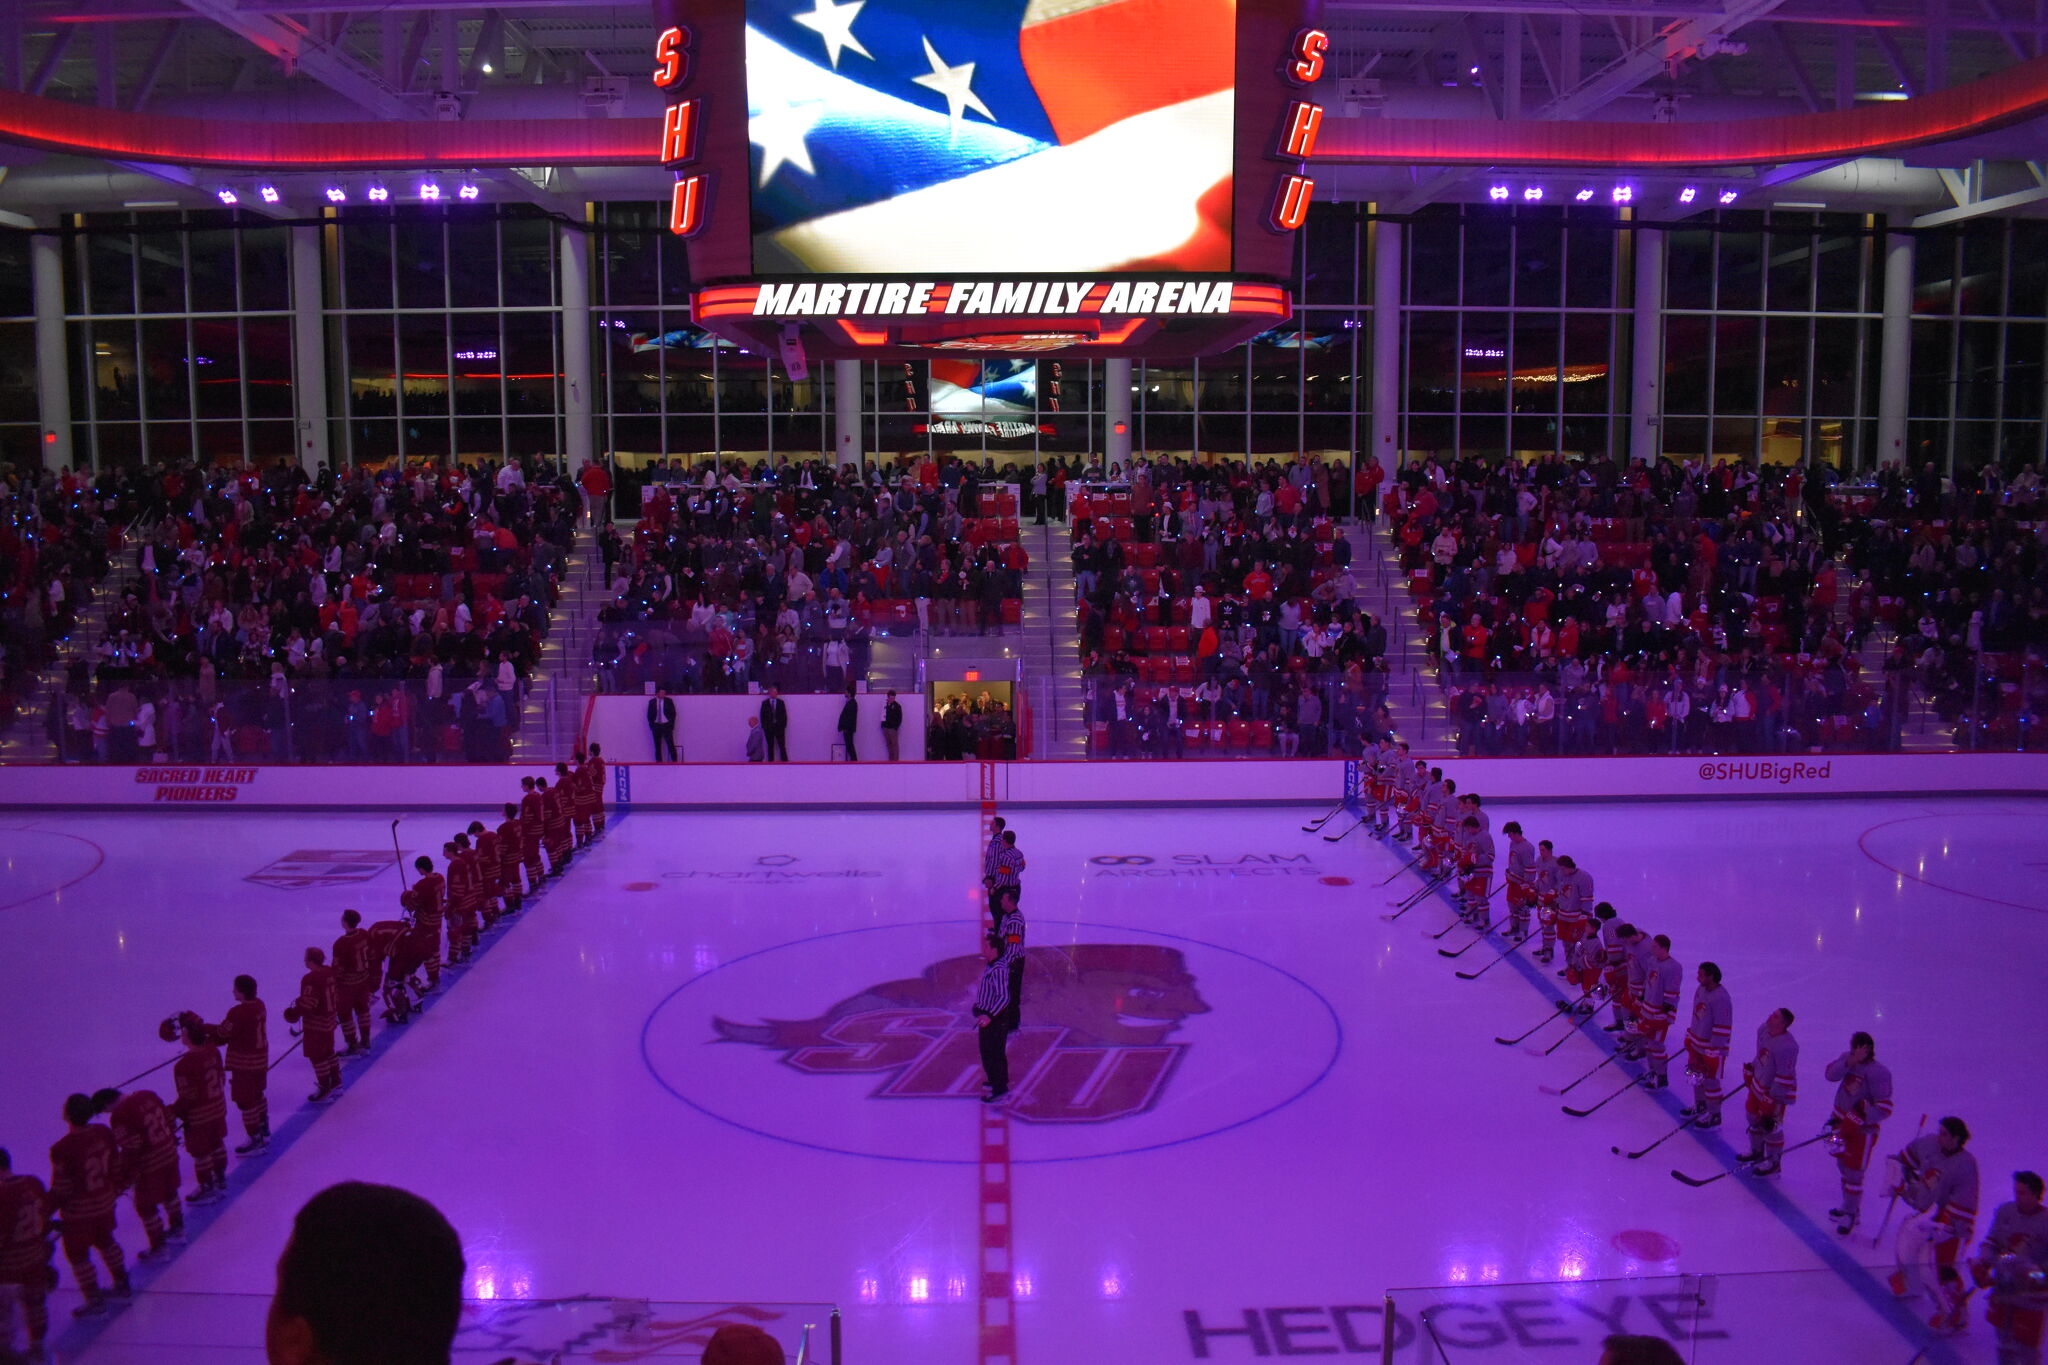 Sacred Heart hockey opens Martire Family Arena with sellout crowd